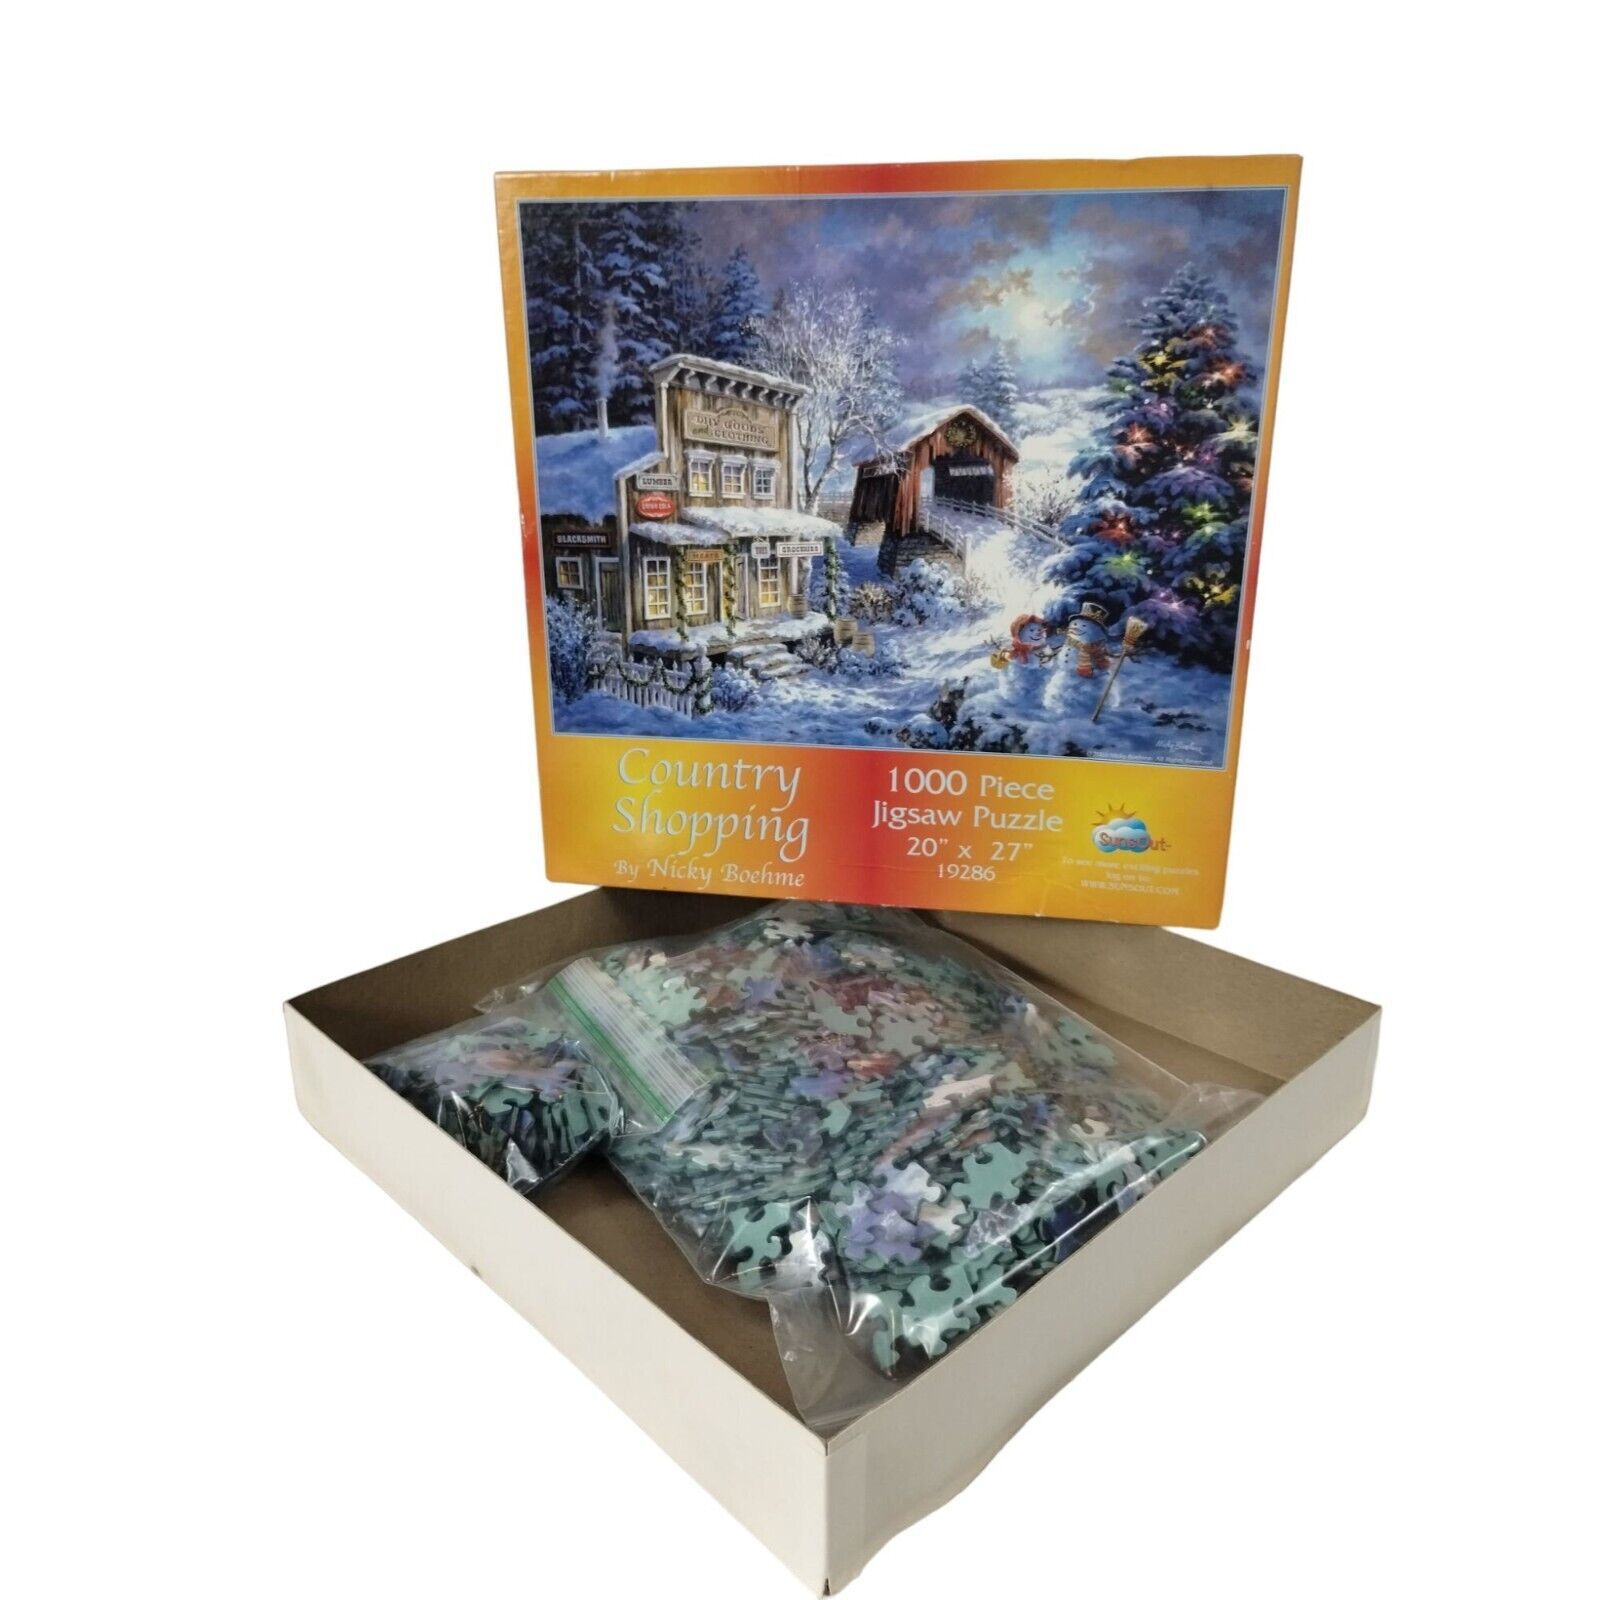 Primary image for SunsOut Country Shopping 1000 Piece Holiday Jigsaw Puzzle Country Store Complete